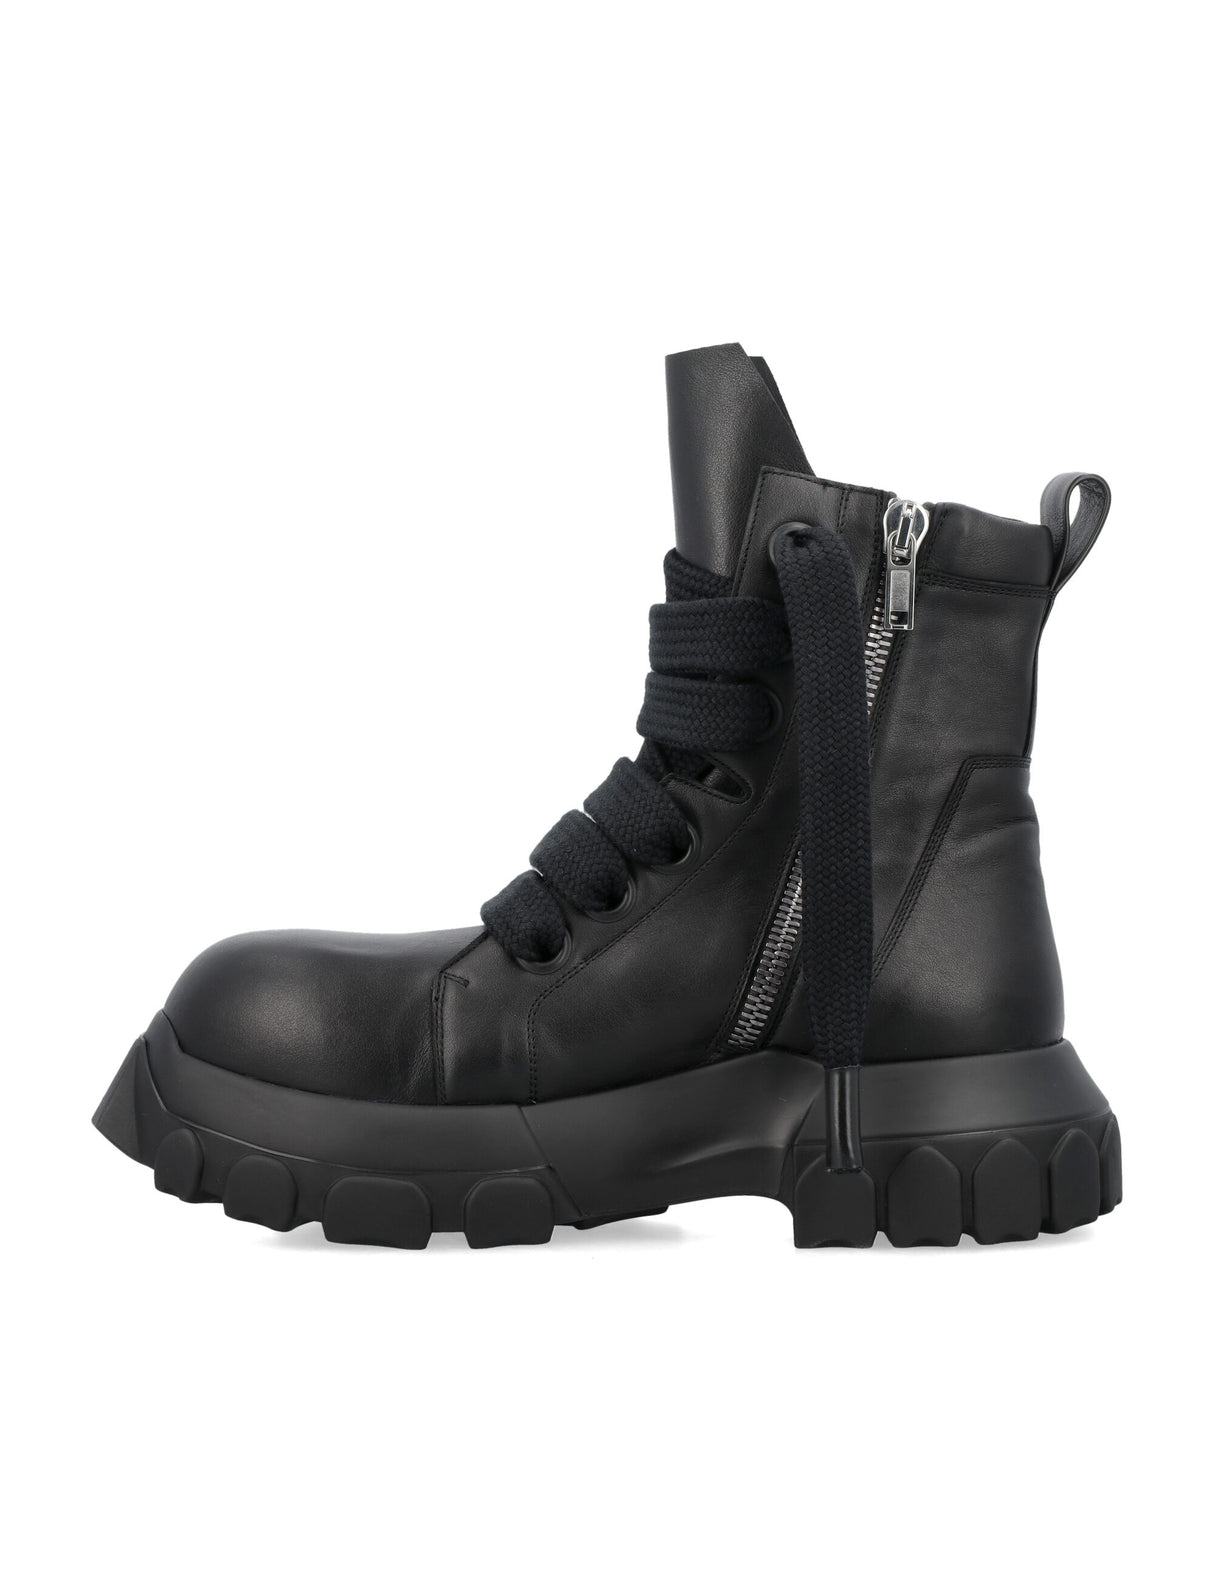  JumboLaced Bozo Tractor Boots - Black